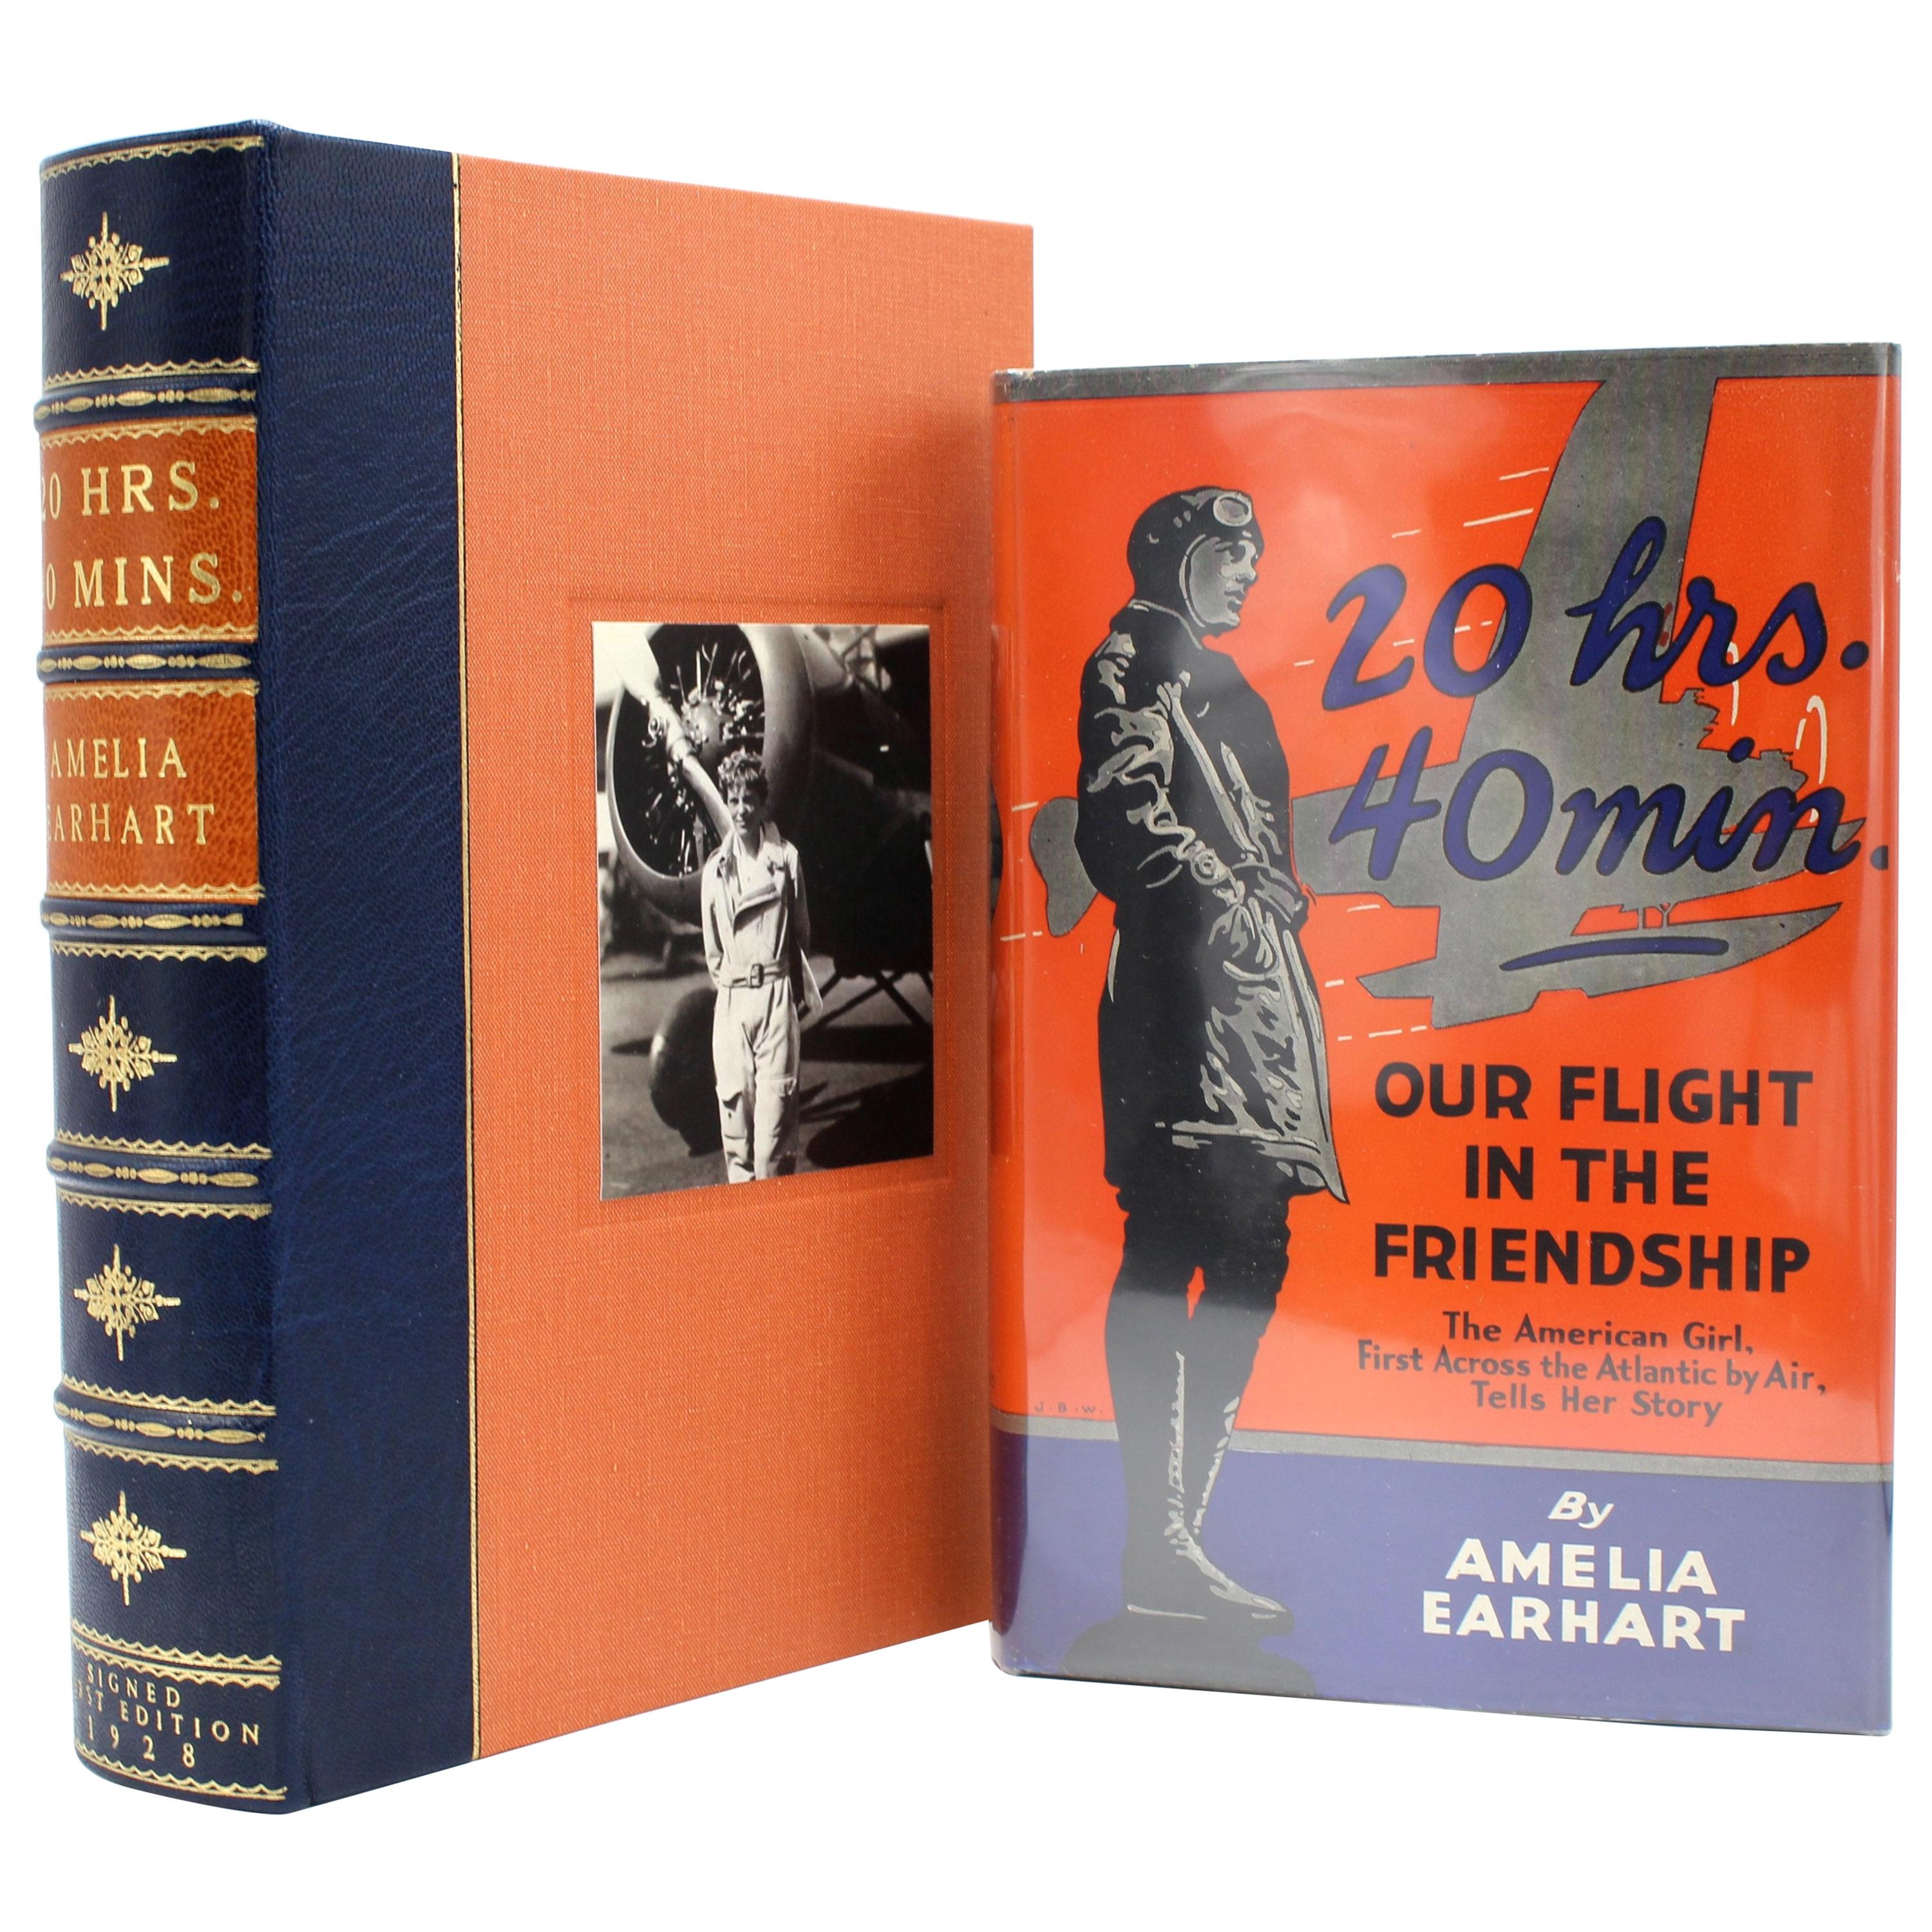 20 Hrs 40 Min, Our Flight in the Friendship, Signed by Amelia Earhart